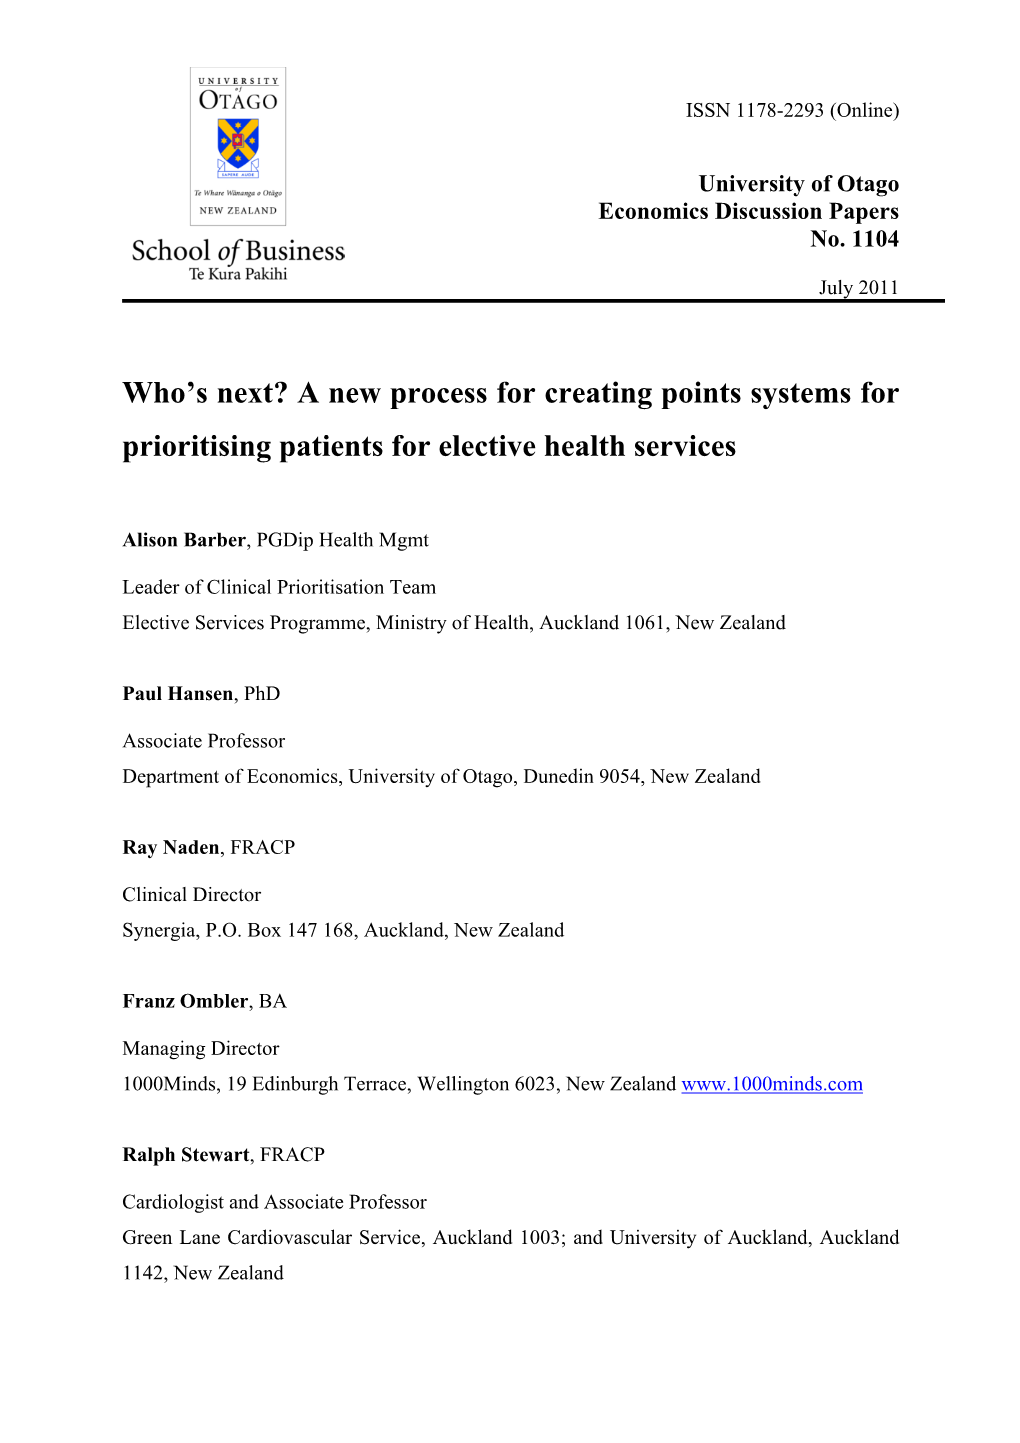 A New Process for Creating Points Systems for Prioritising Patients for Elective Health Services